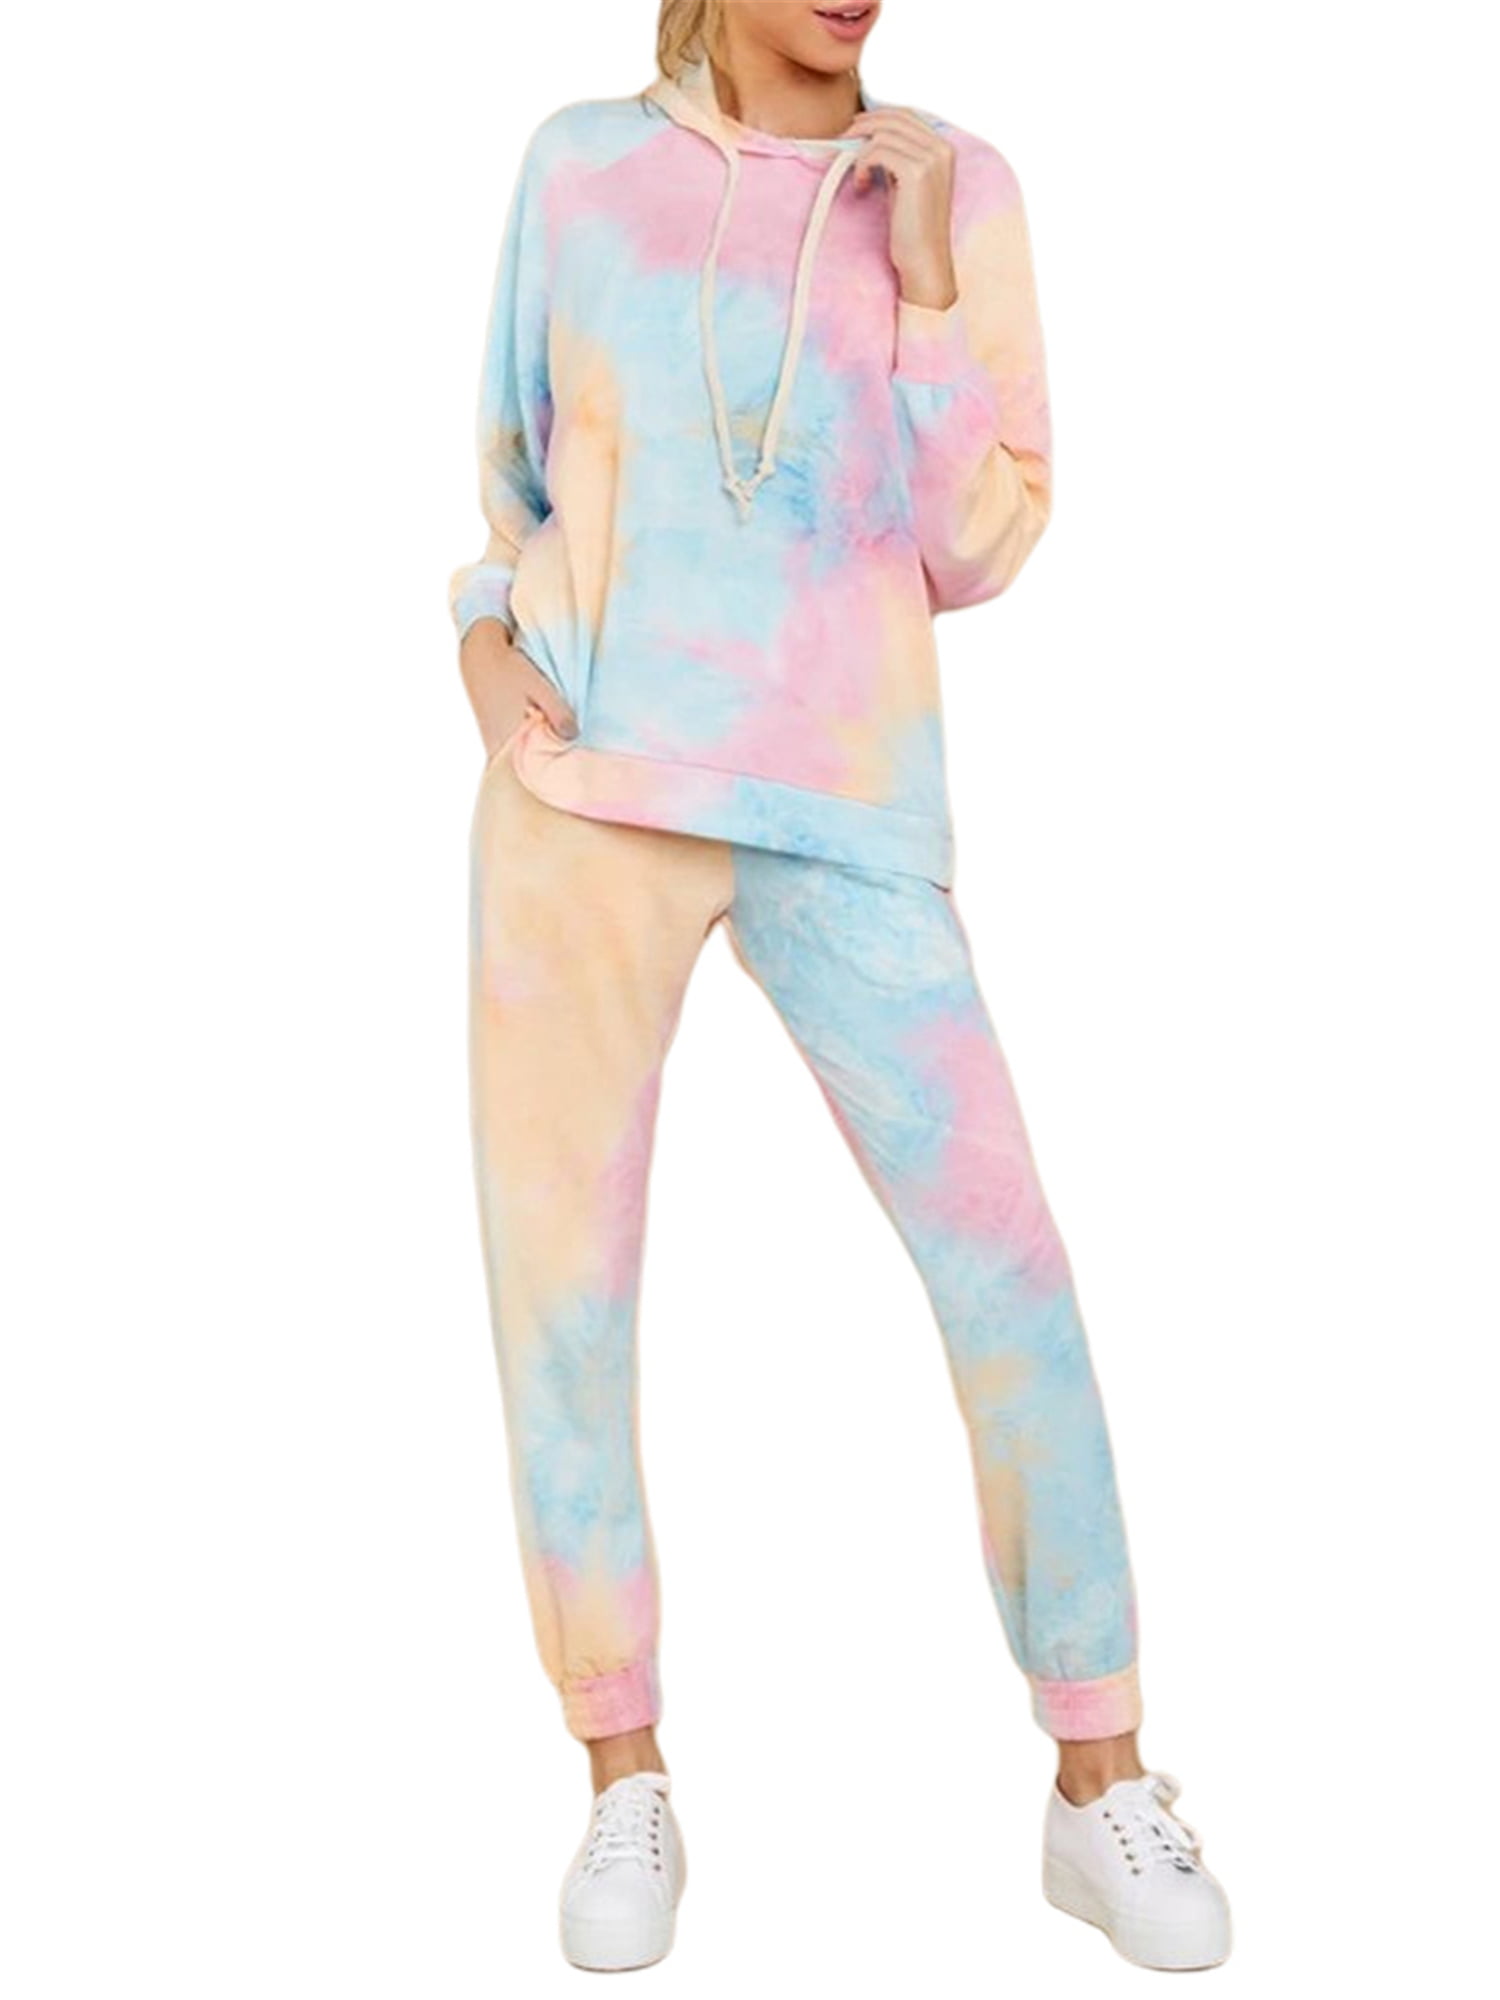 ELOVER Womens Pajamas Set Tie Dye Printed Long Sleeve Button Down Tops and Shorts 2 Piece Sleepwear Lounge Set 